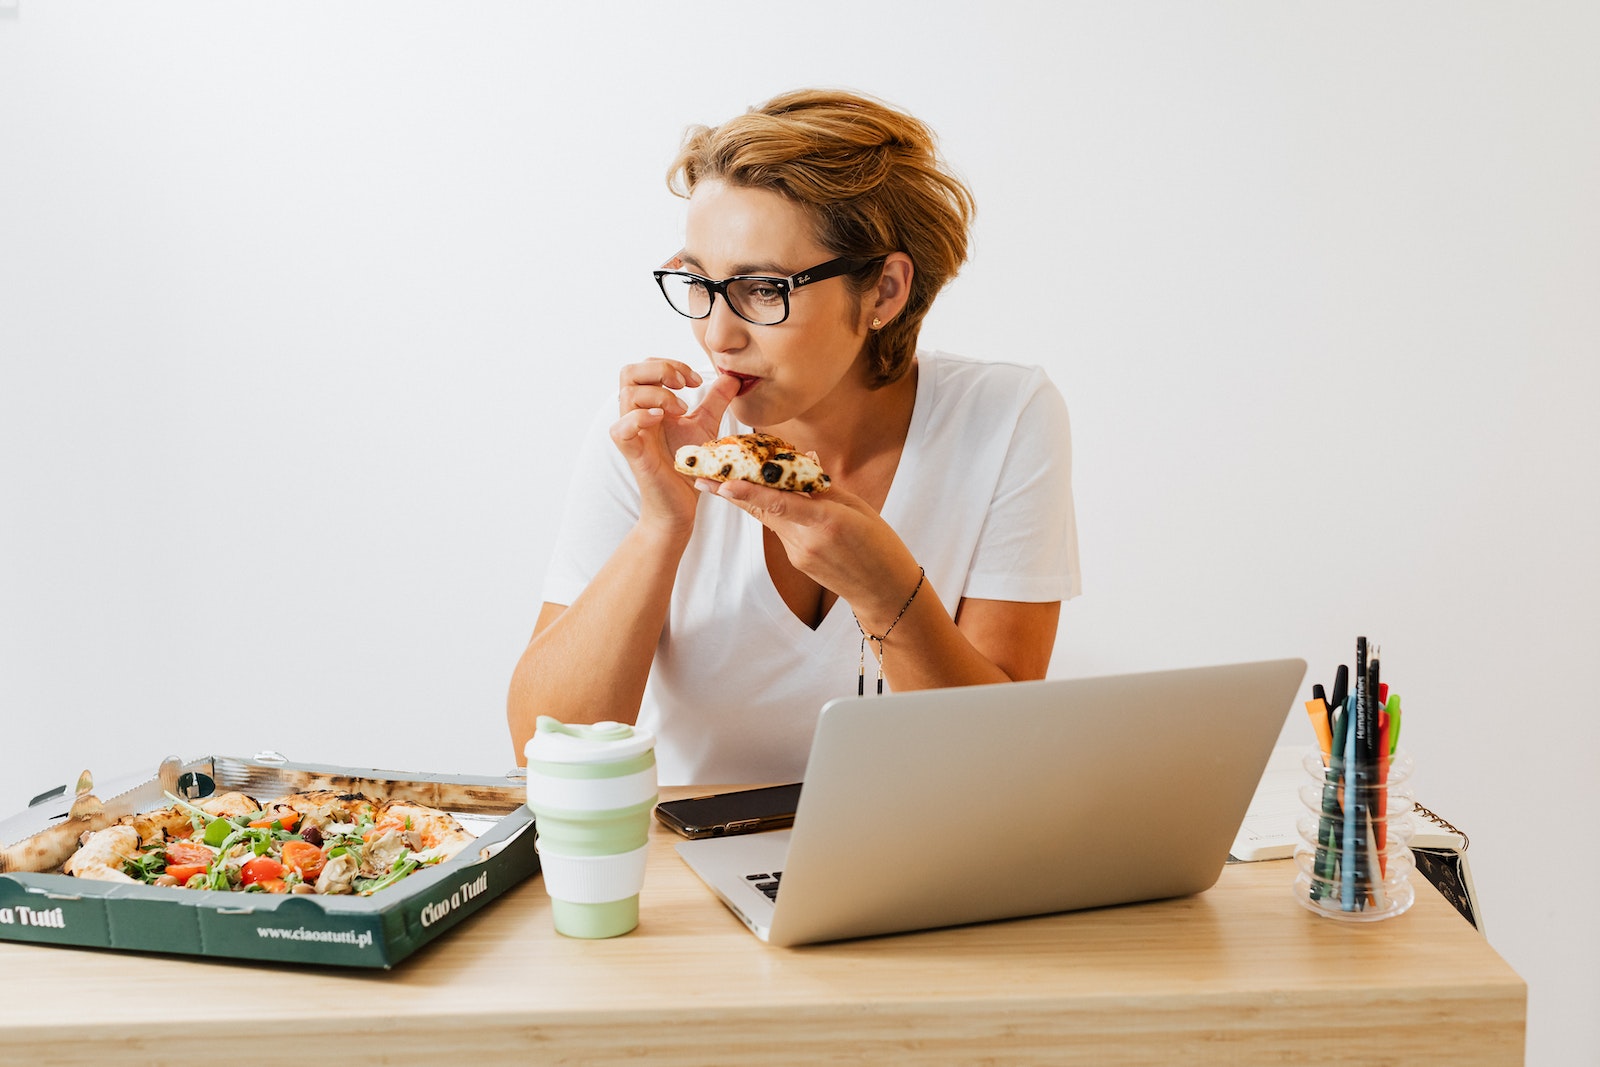 Tips to reduce emotional eating during times of stress understanding